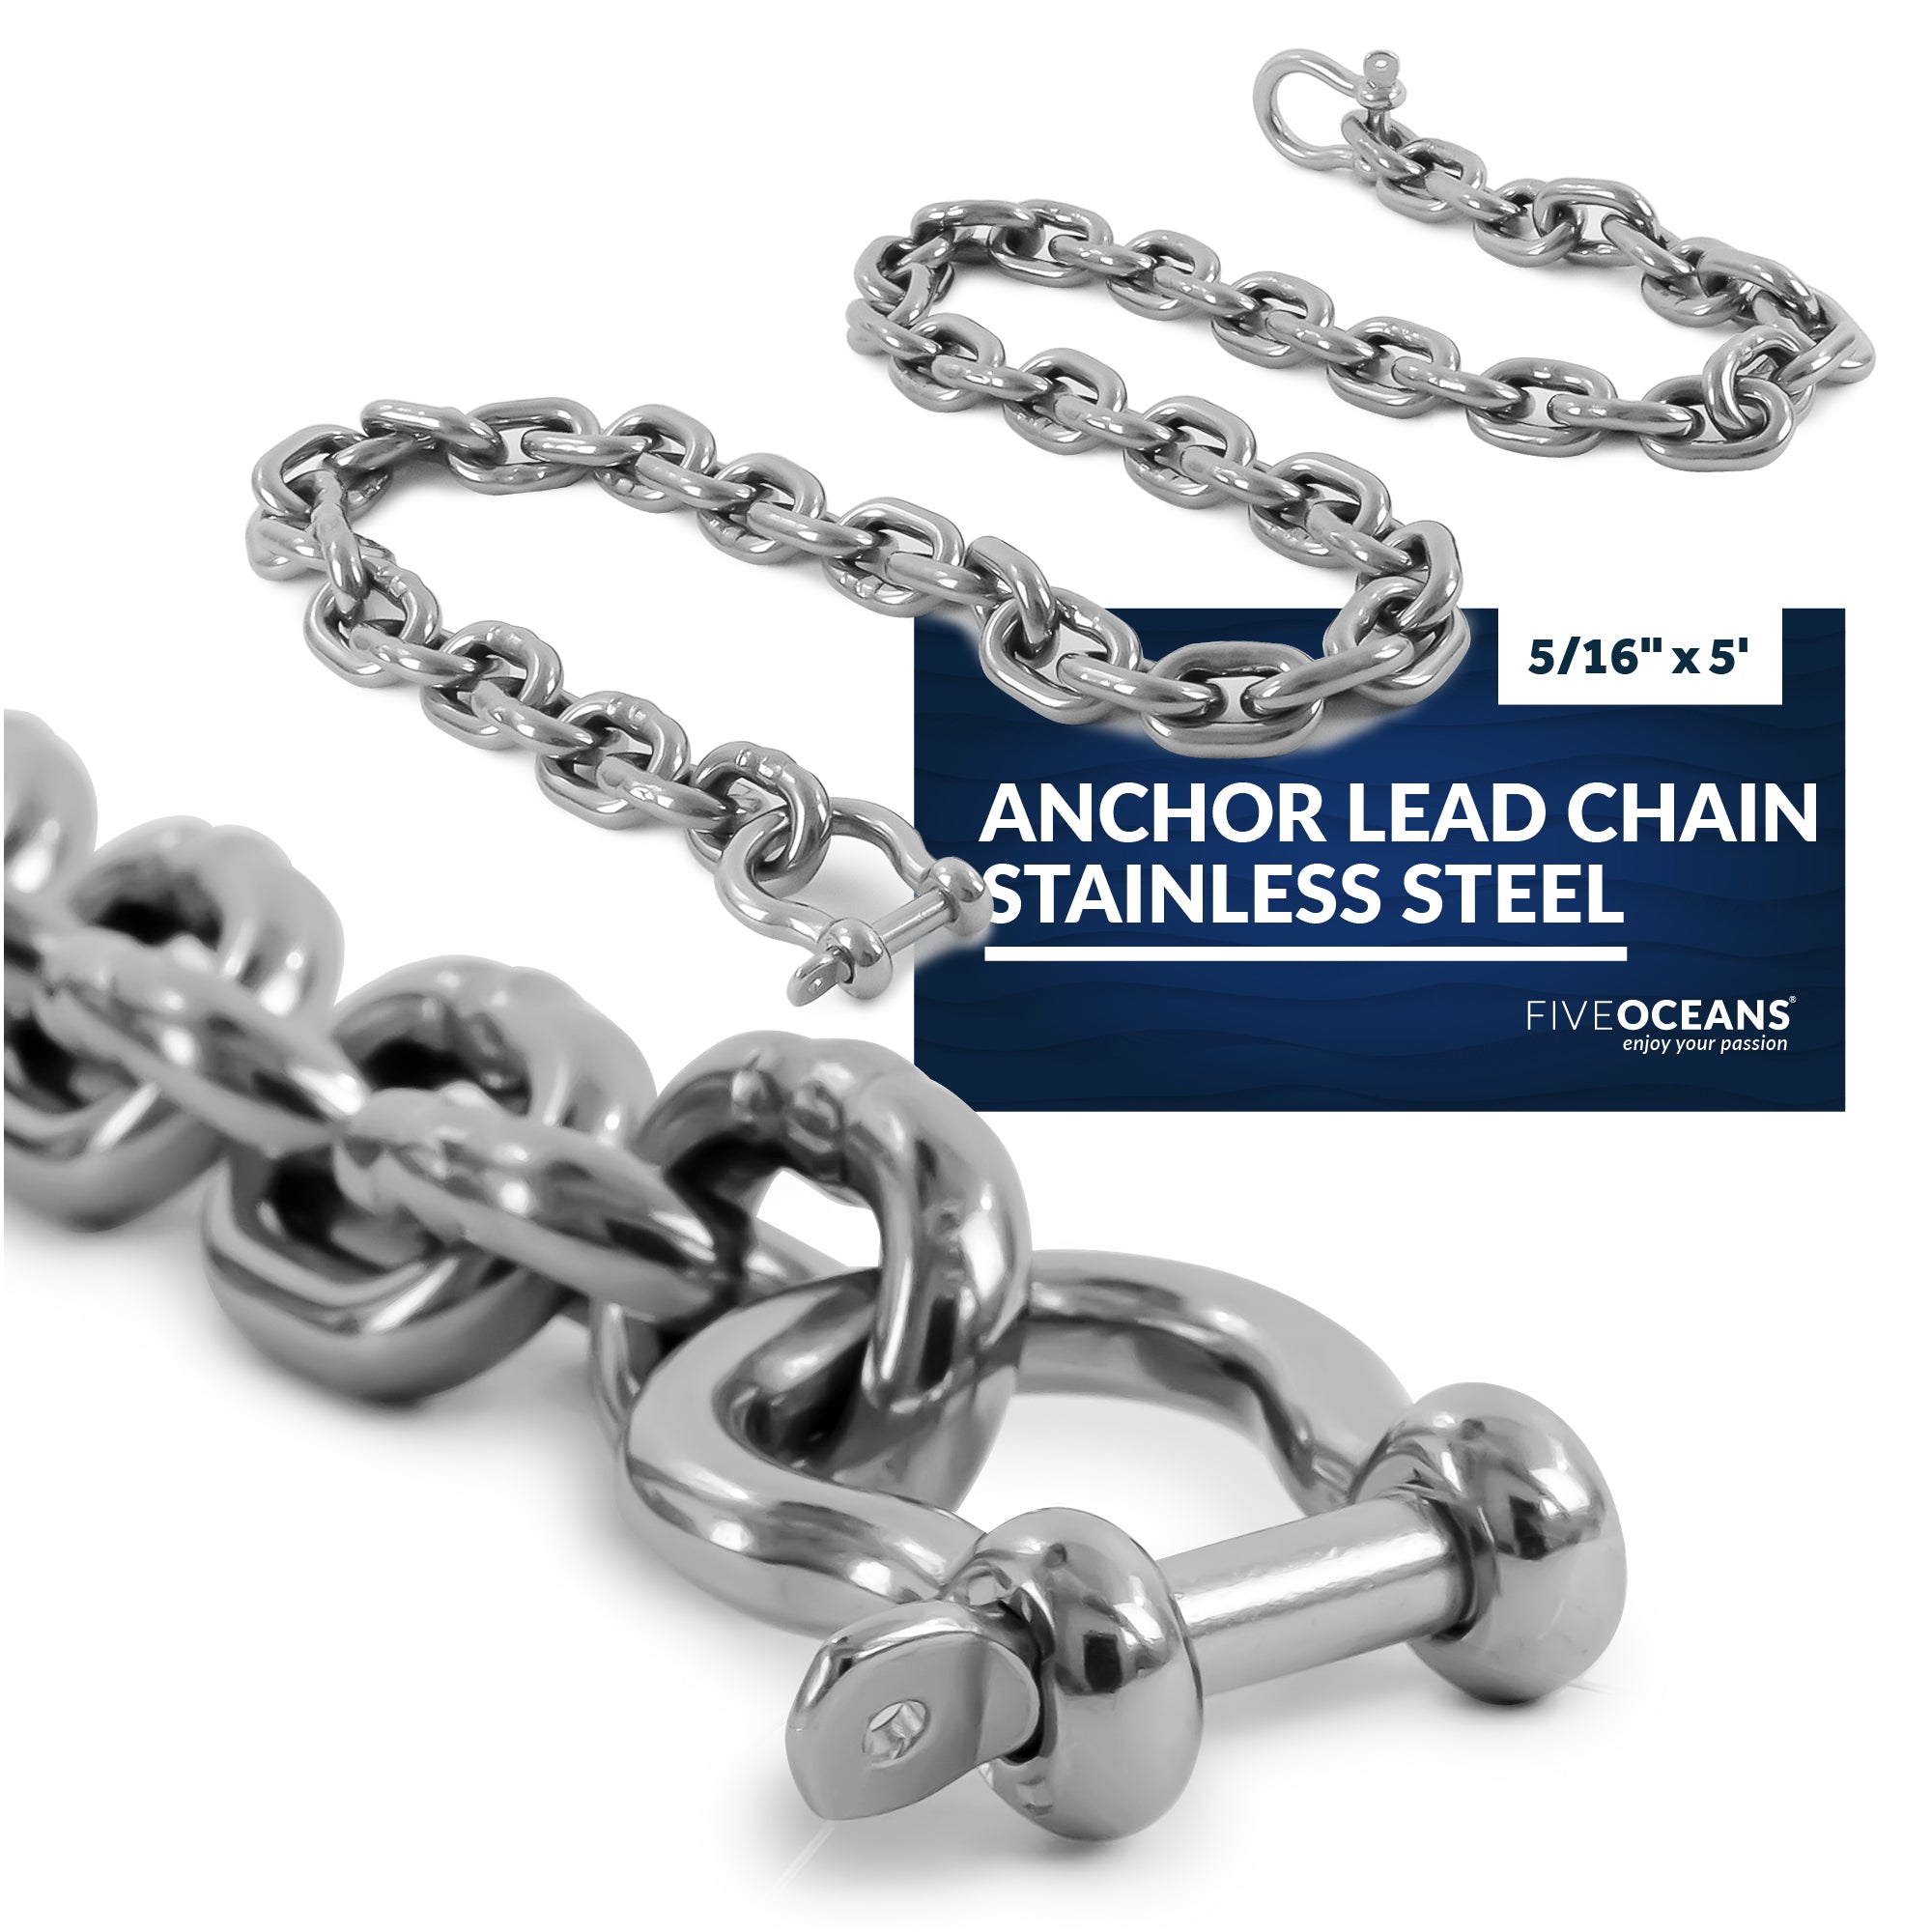 Anchor Lead Chain 5/16" x 5', HTG4 Stainless Steel - FO4493-S5